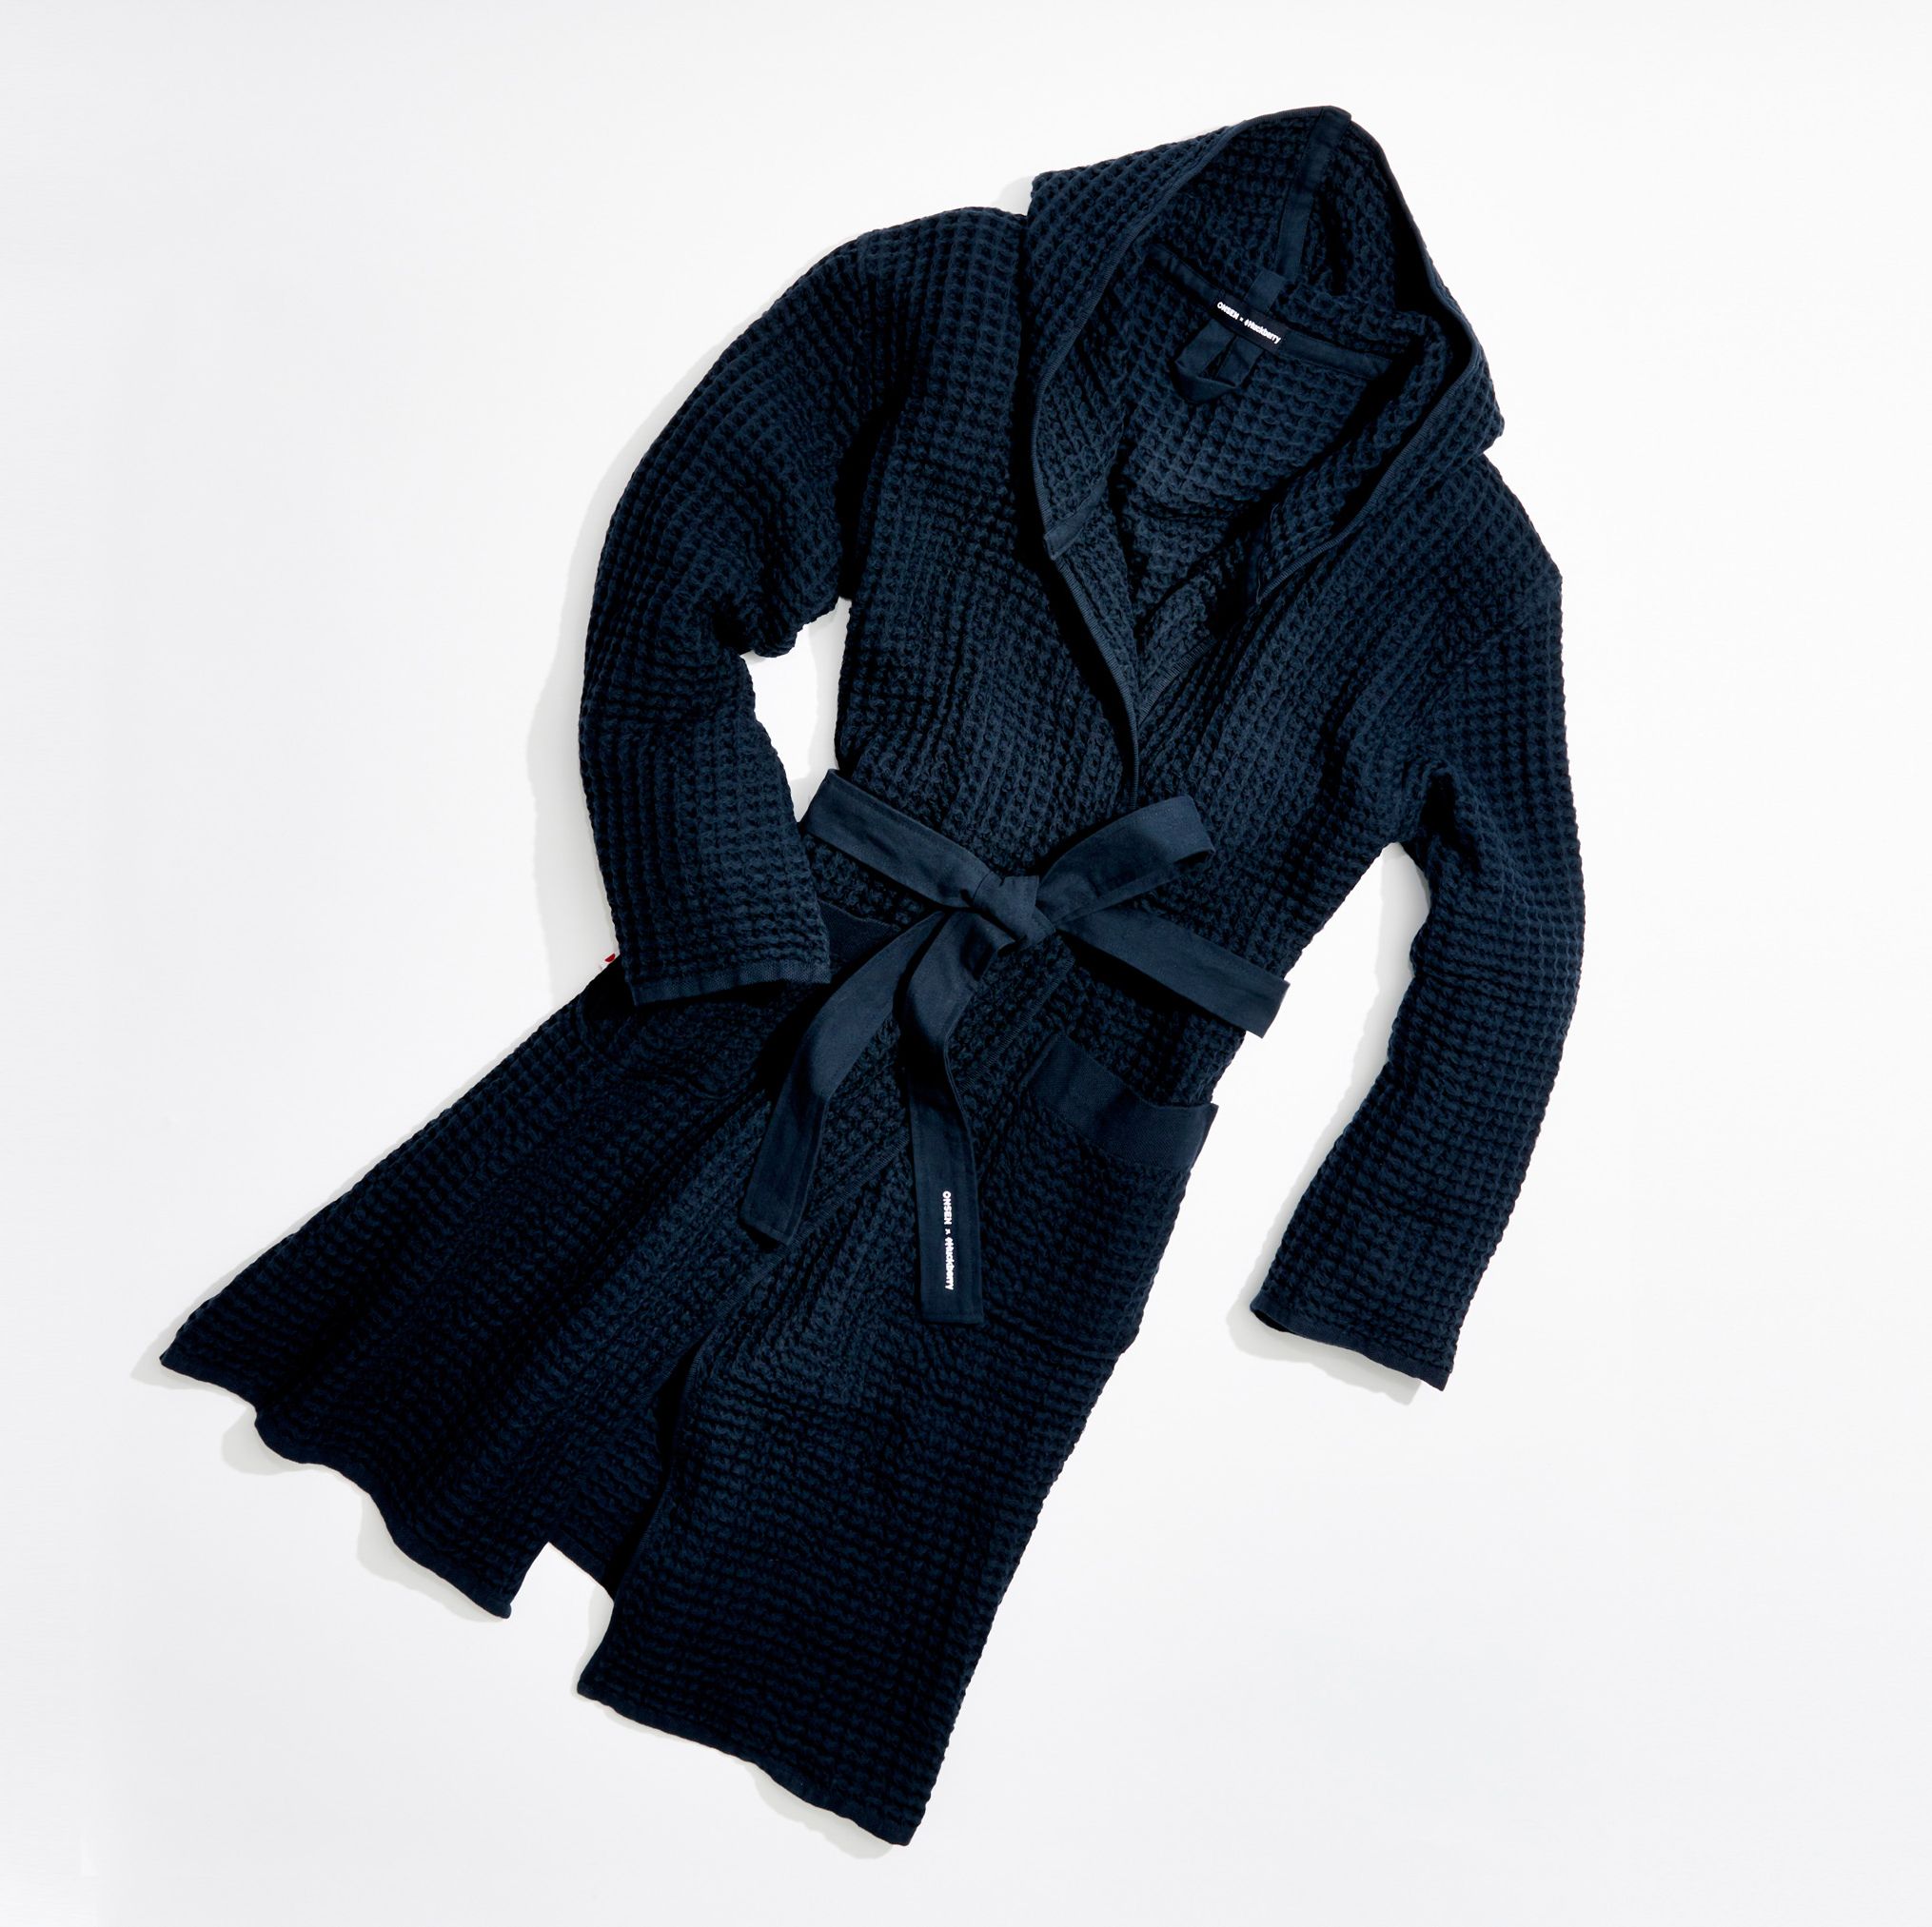 The Hooded Bathrobe You'll Want To—and Can—Wear All Day Long